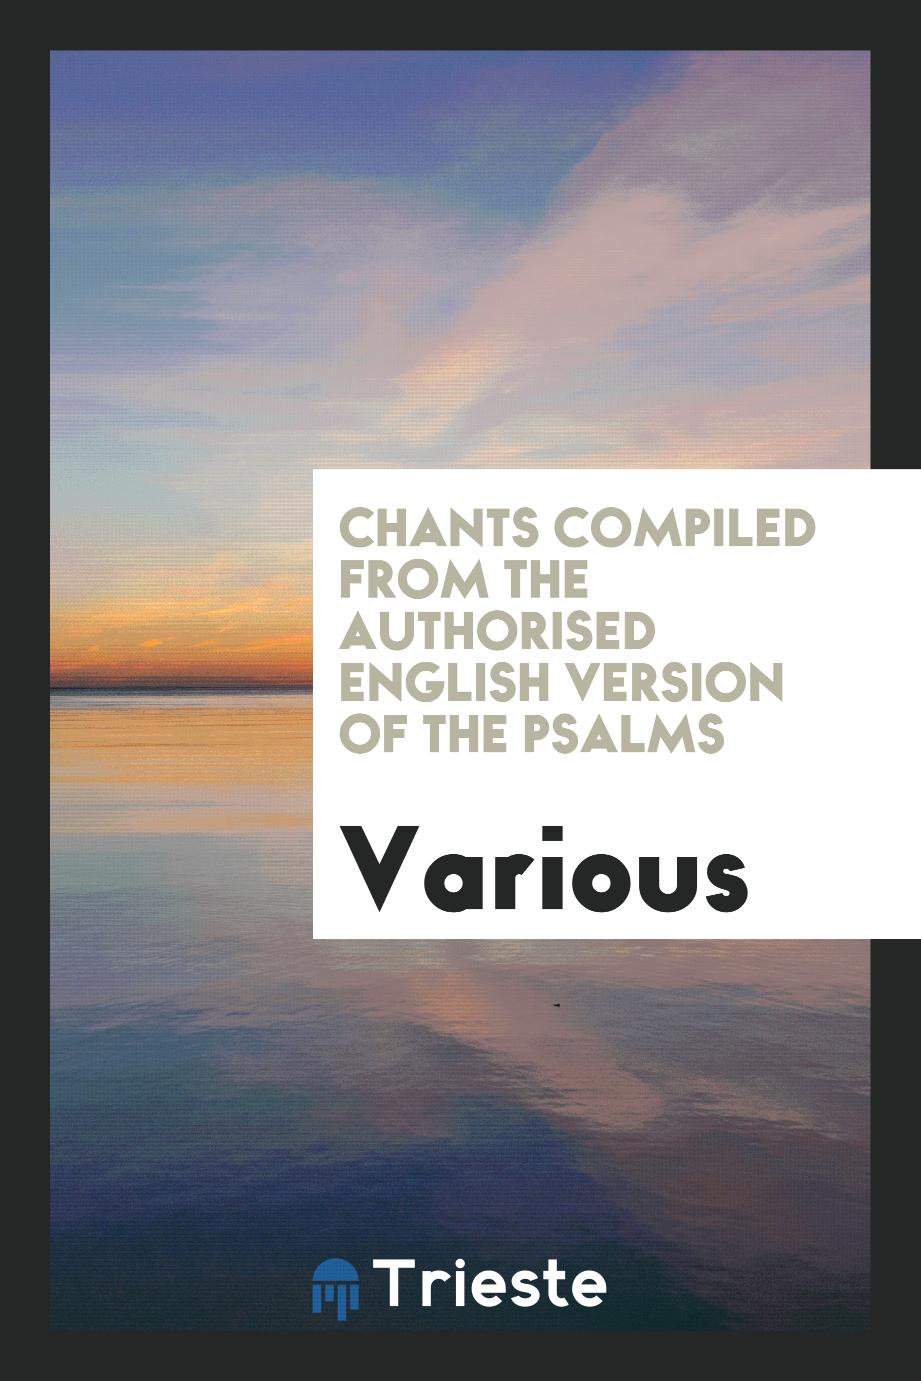 Chants compiled from the authorised English version of the Psalms